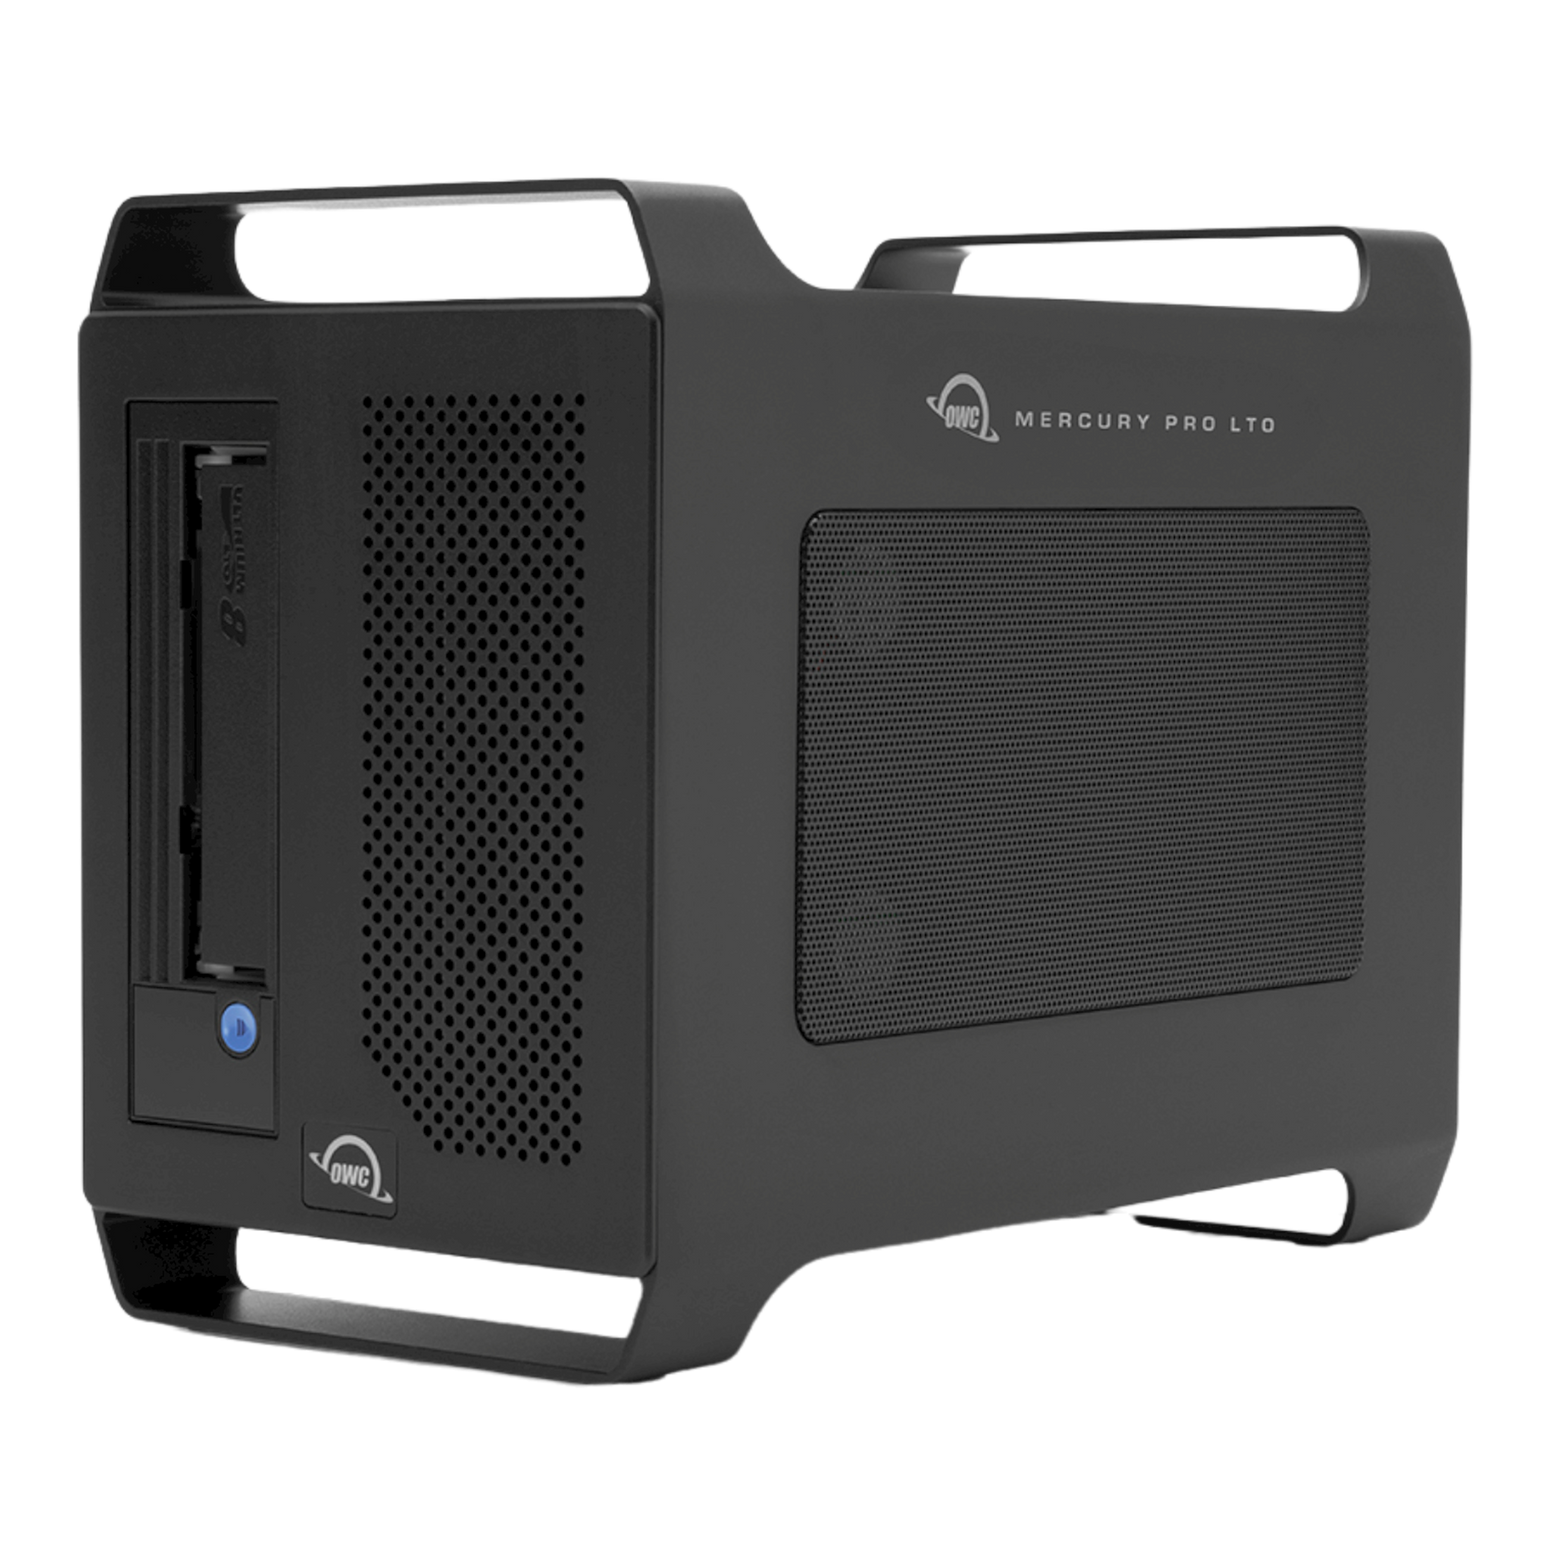 OWC Mercury Pro LTO Thunderbolt LTO-8 Tape Storage / Archiving Solution with 2TB Onboard SSD Storage and ArGest Backup Software